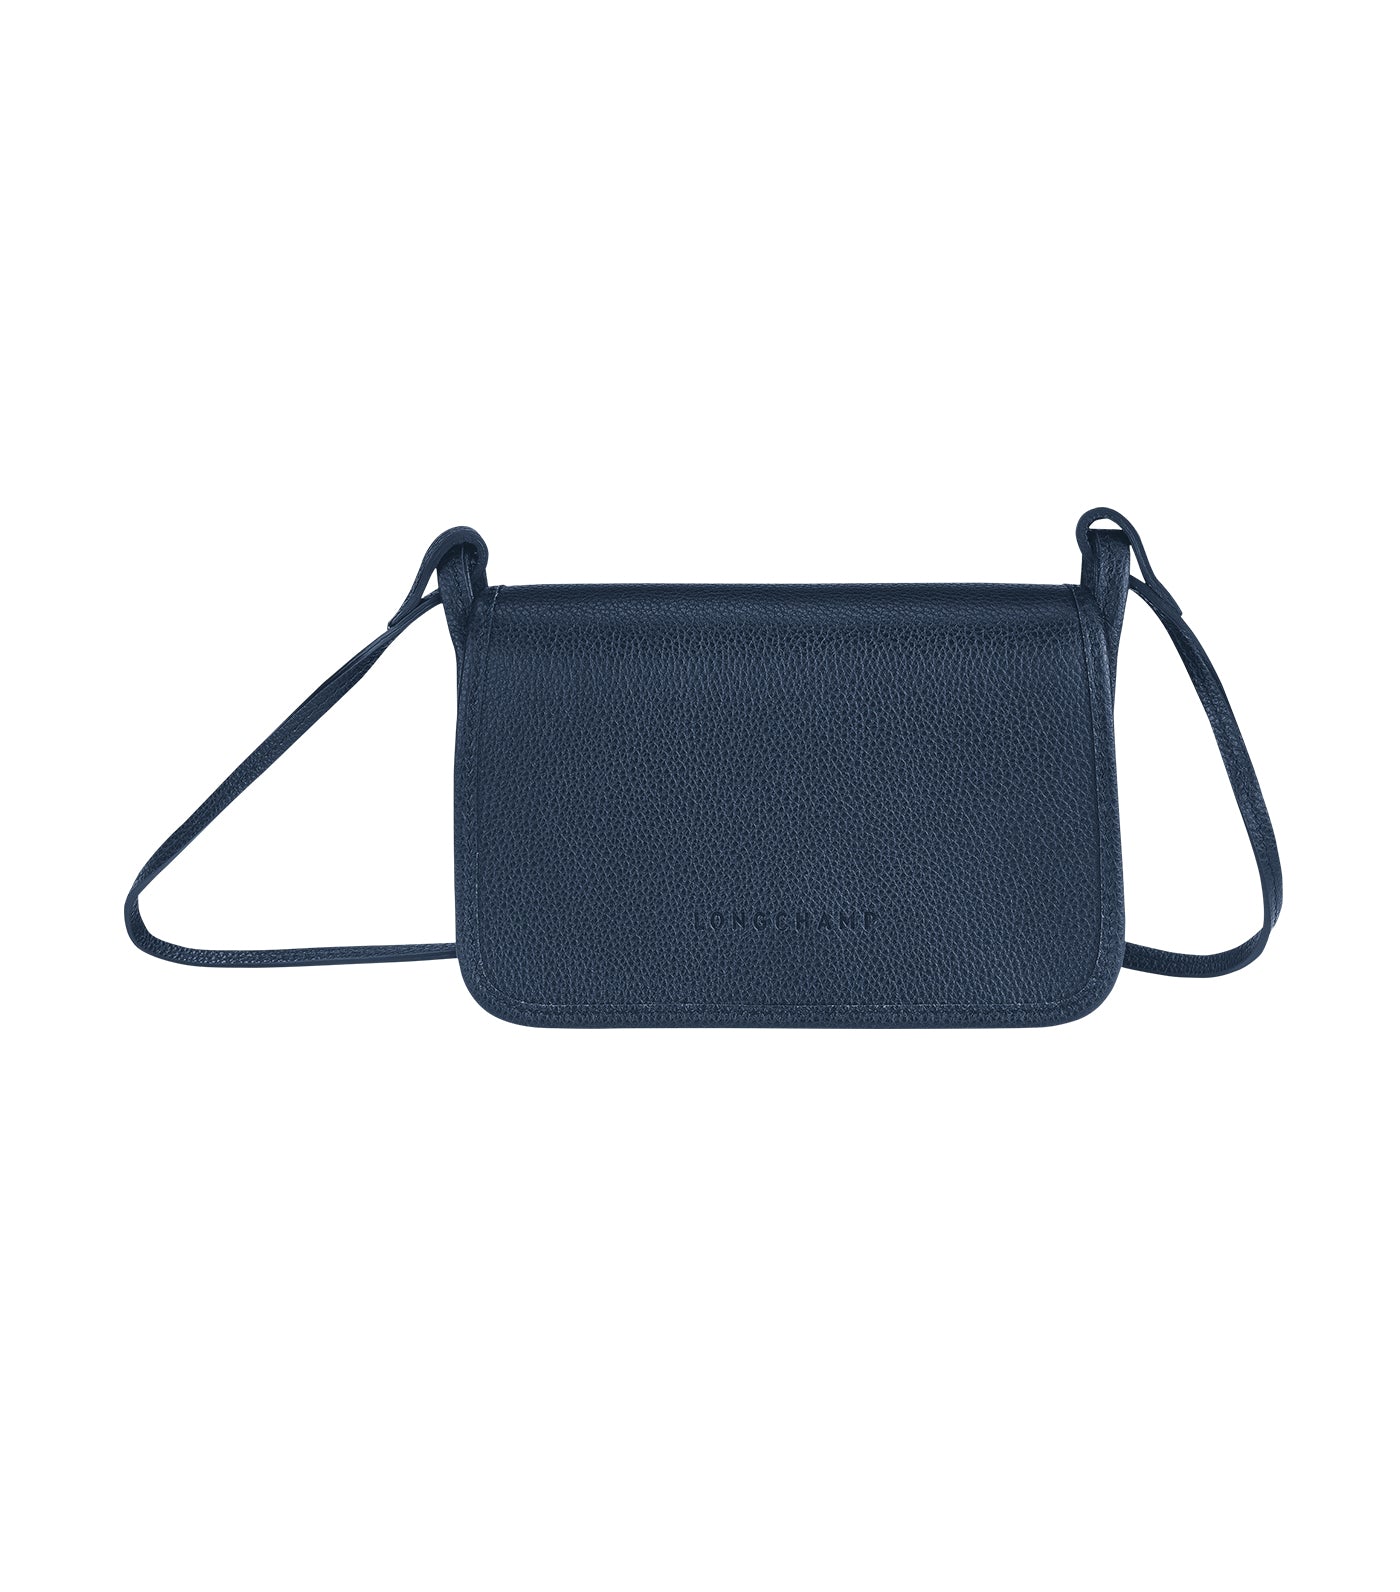 Le Foulonné Wallet On Chain Navy